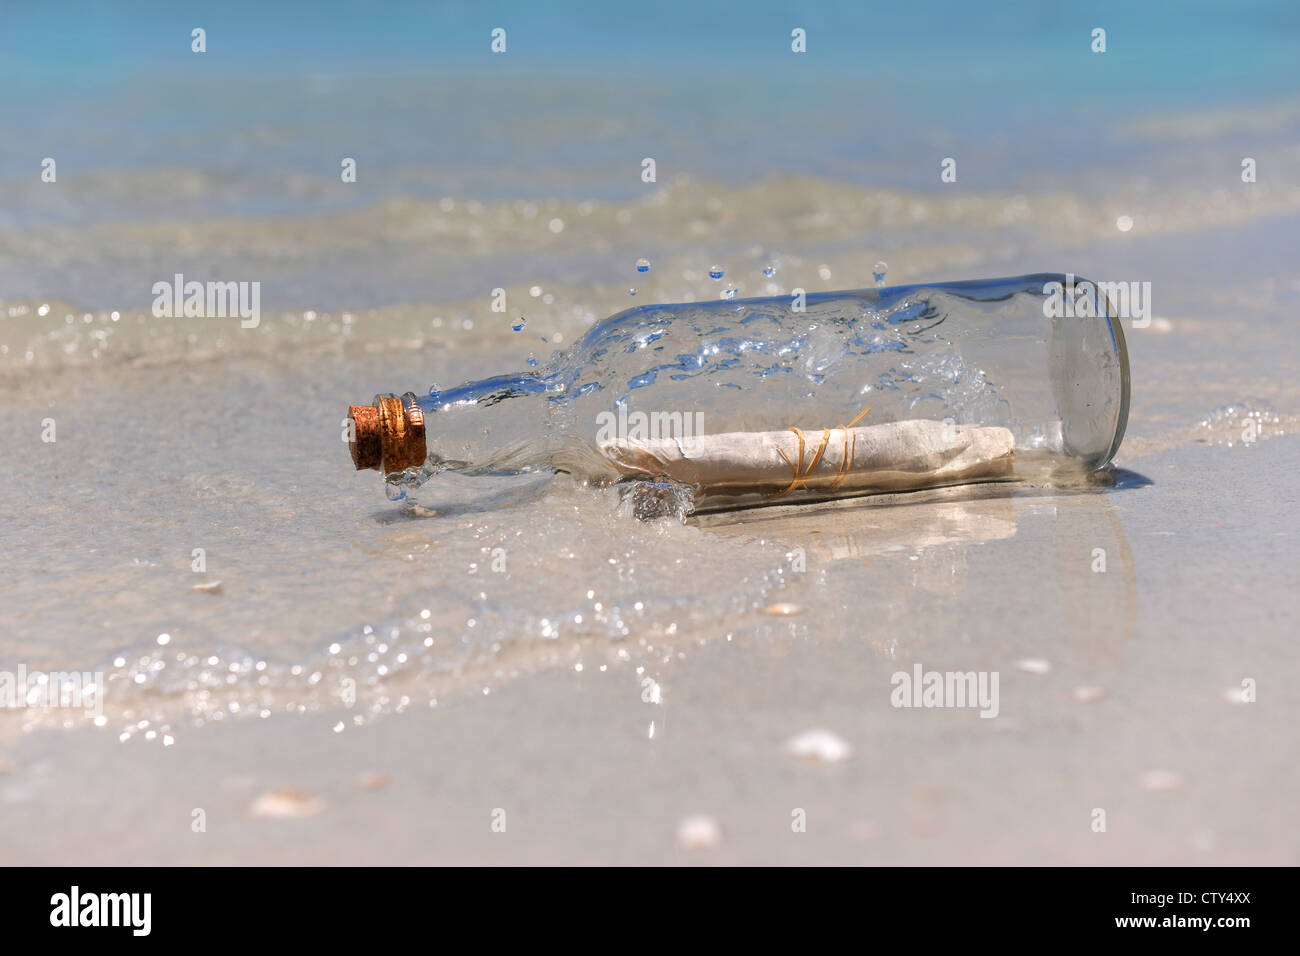 Message in a bottle with waves crashing on shore Stock Photo